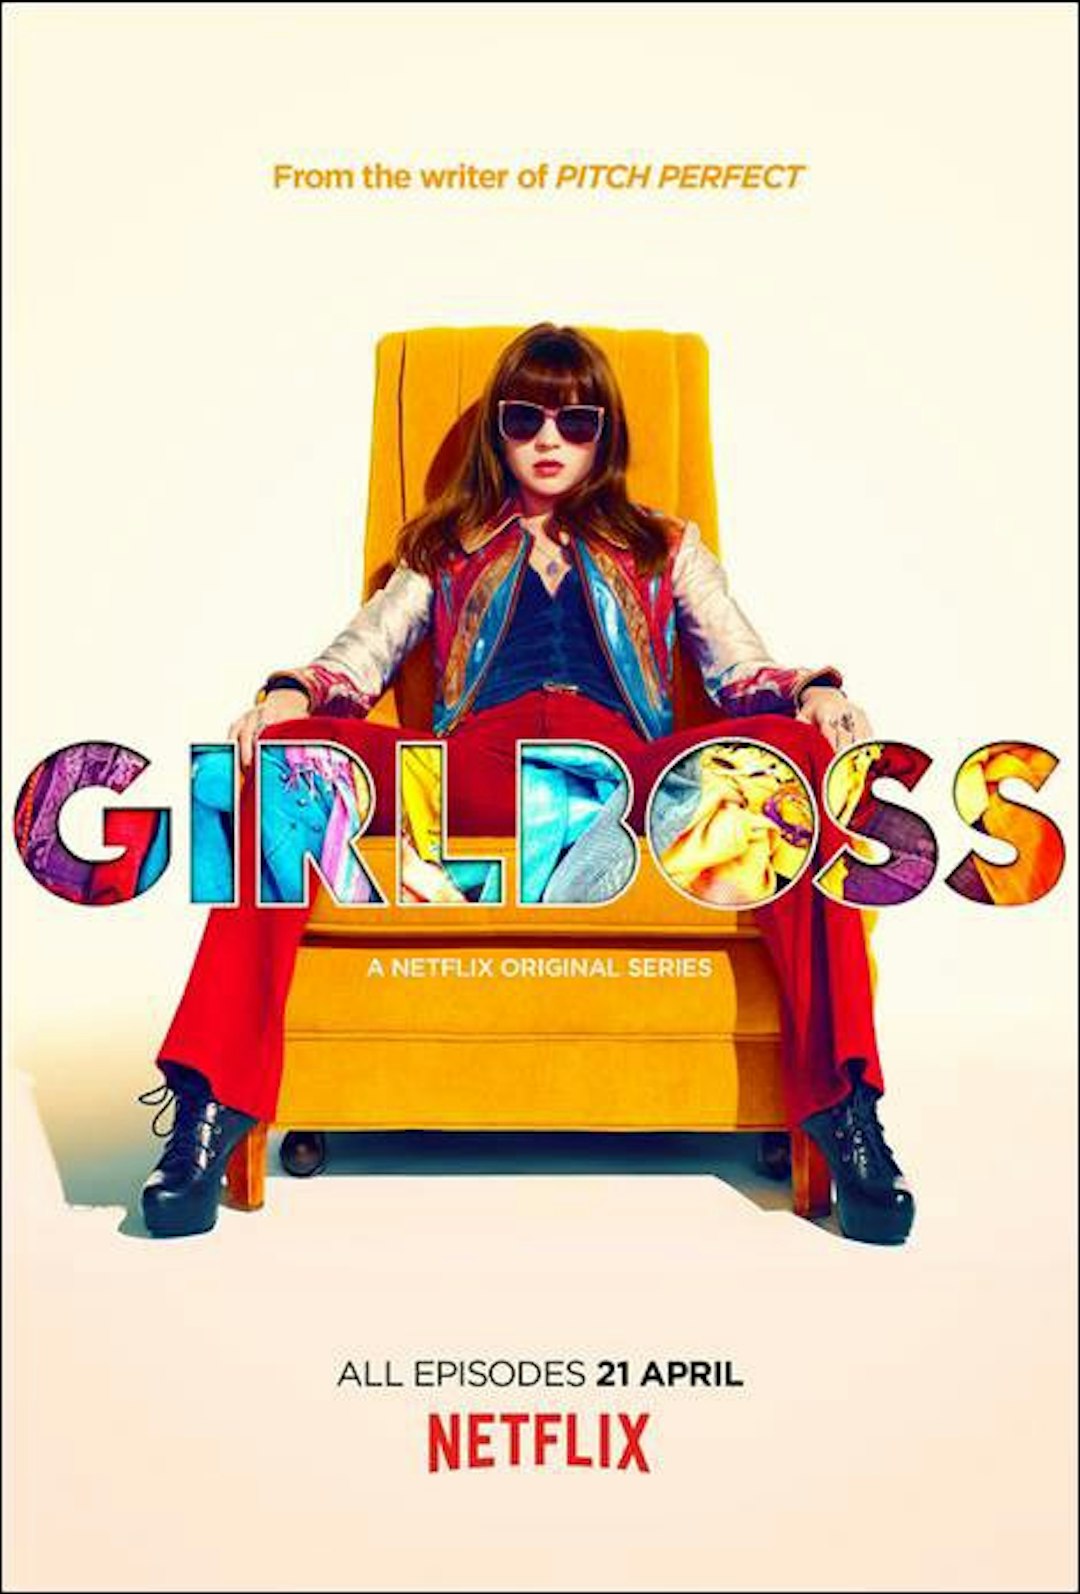 featured image - What I Think #GIRLBOSS is About